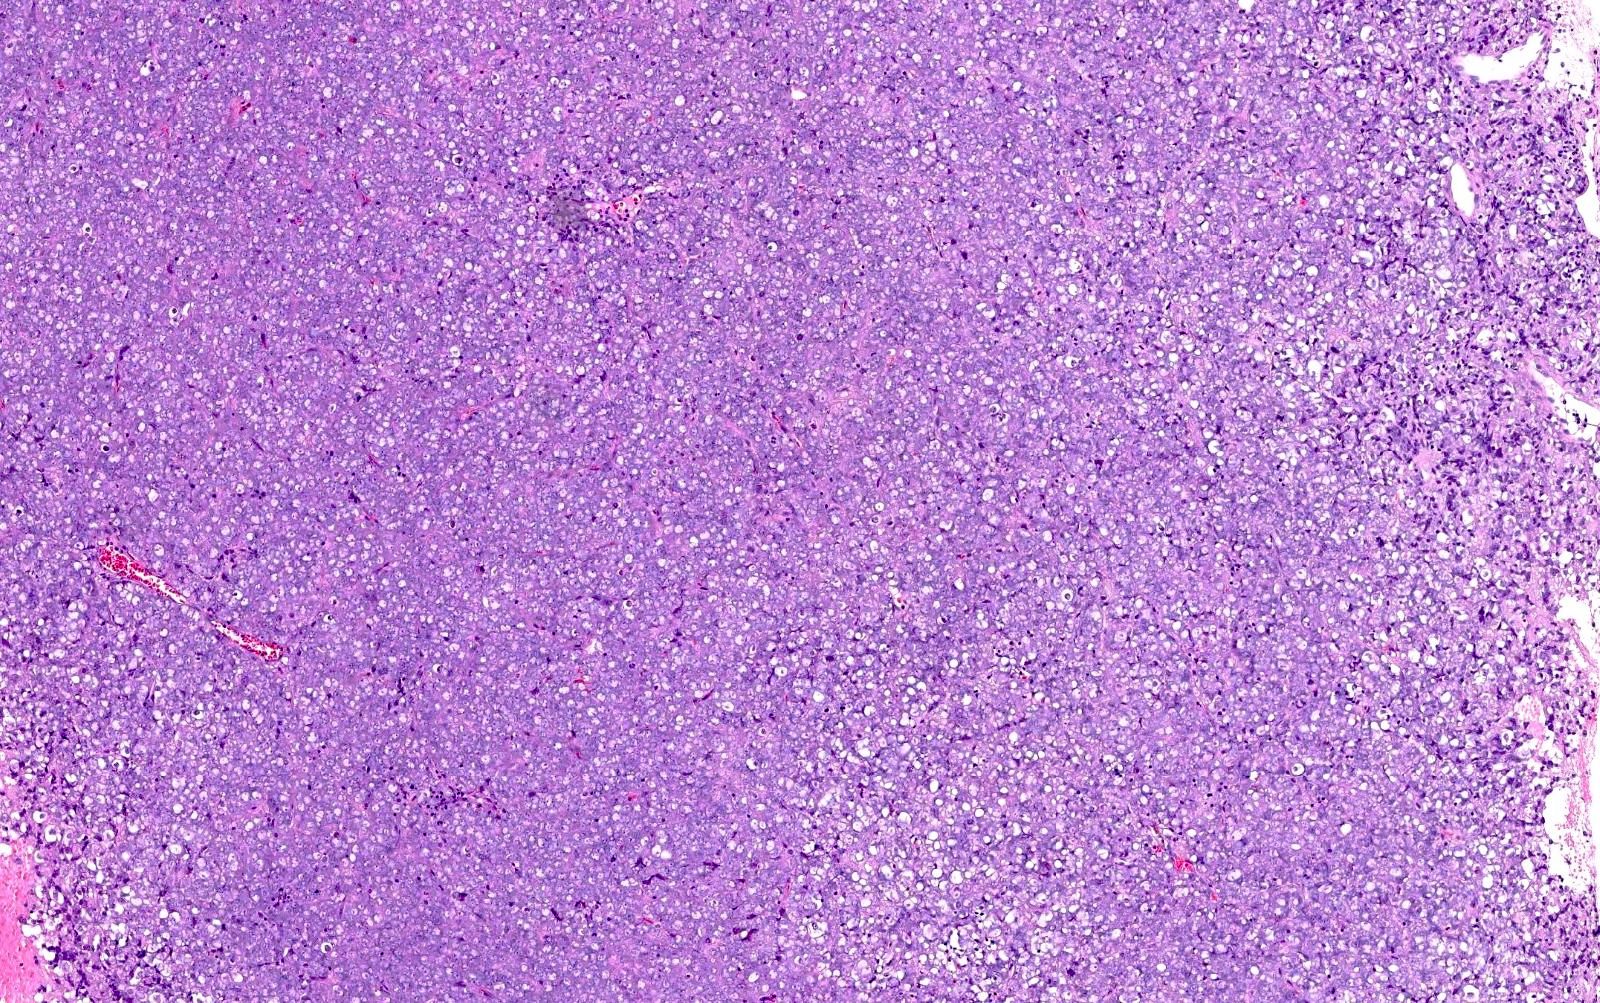 Tumor cells in sheets, no gland or papillary formation